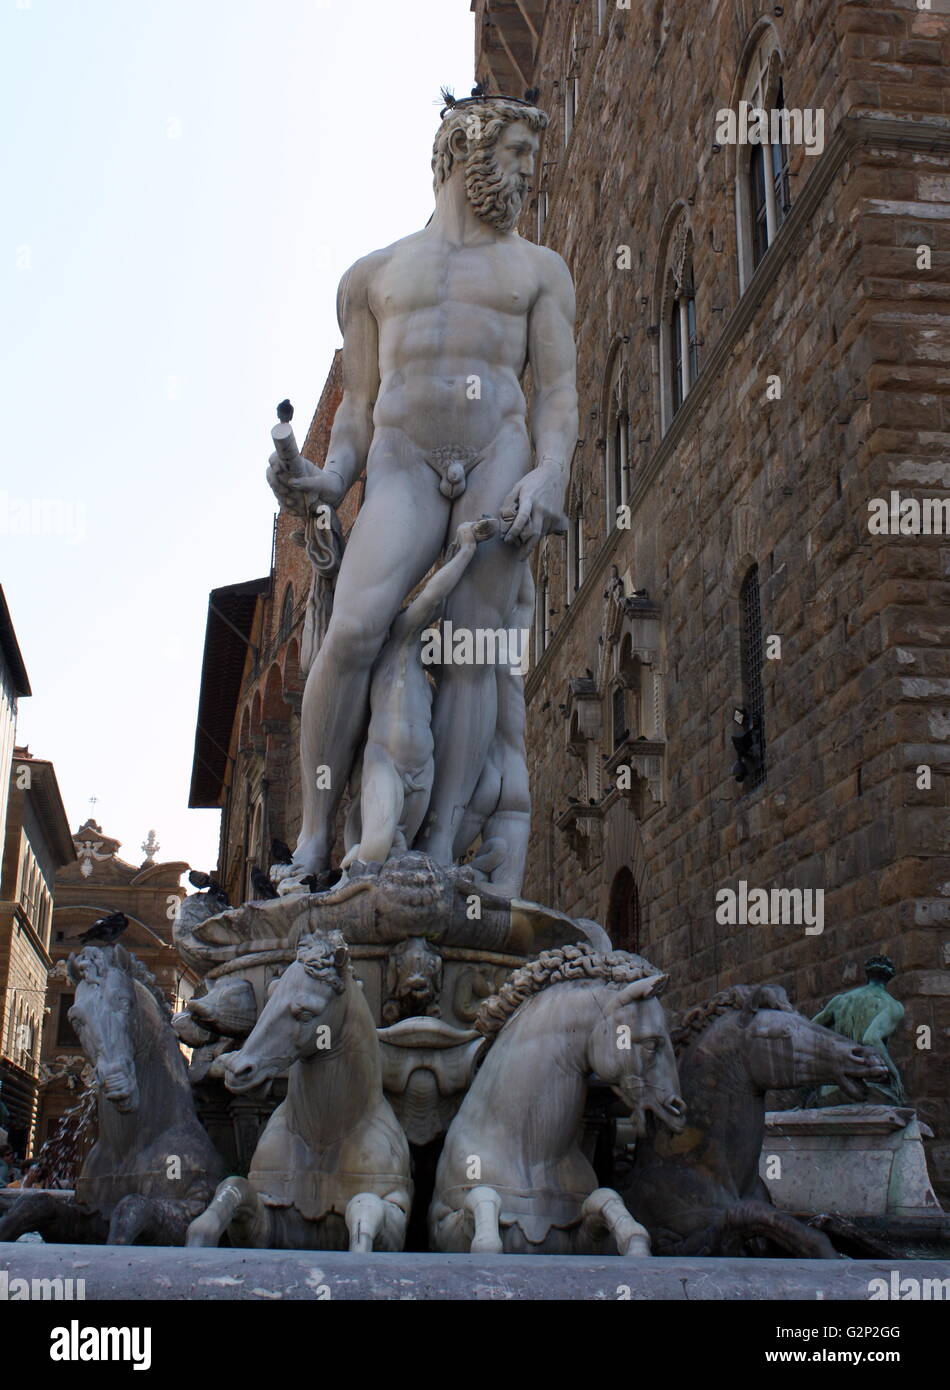 The Fountain of Neptune in the Piazza della Signoria (a square in front of the Palazzo Vecchio) Florence, Italy. It was commissioned in 1565 and is by the sculptor Bartolomeo Ammannati, the design however was done by Baccio Bandinelli before he died. The sculpture is made from Apuan Marble, and is meant to represent the Florentine dominion over the sea. It was commissioned for a wedding, and the face of Neptune resembles that of Cosimo I de'Medici, Duke of Florence/Grand Duke of Tuscany, and father of the groom. Stock Photo